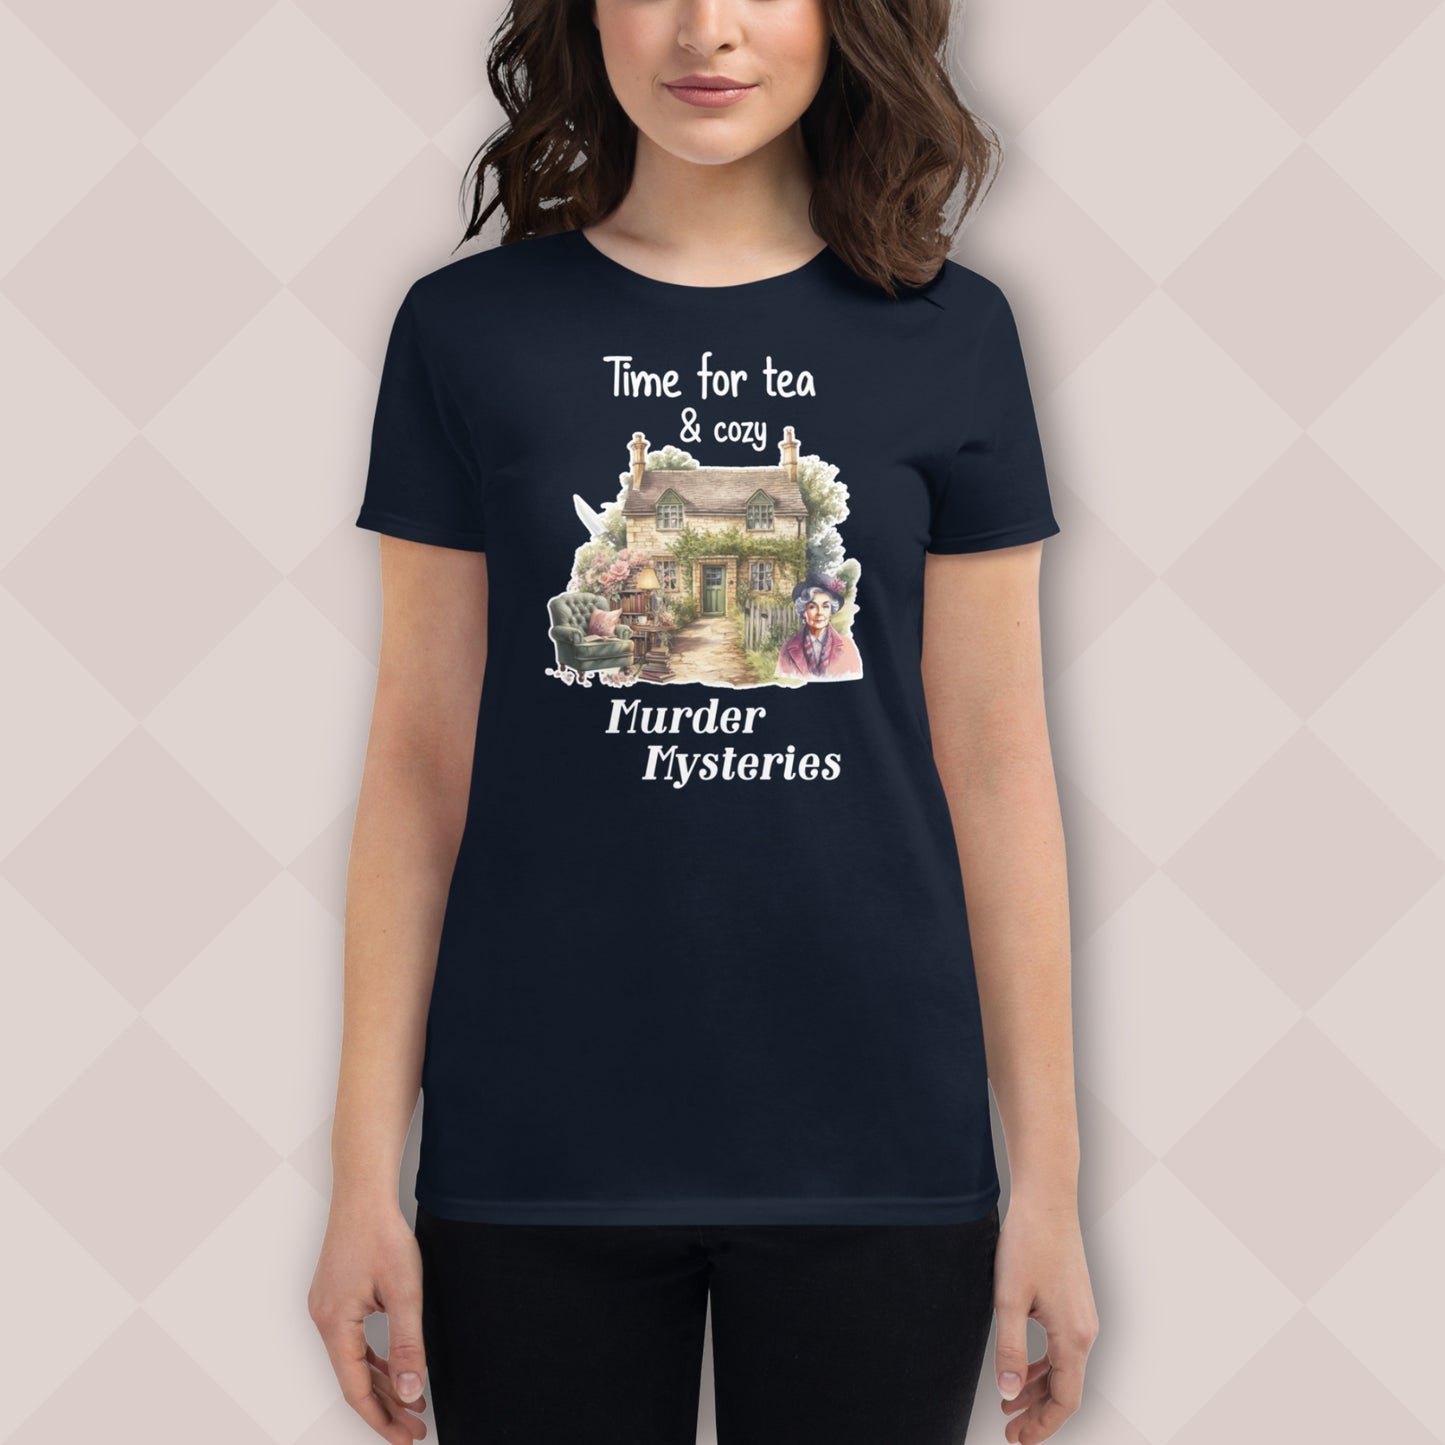 Tea and Murder Mysteries Cozy St. Mary Mead Cottage T-Shirt